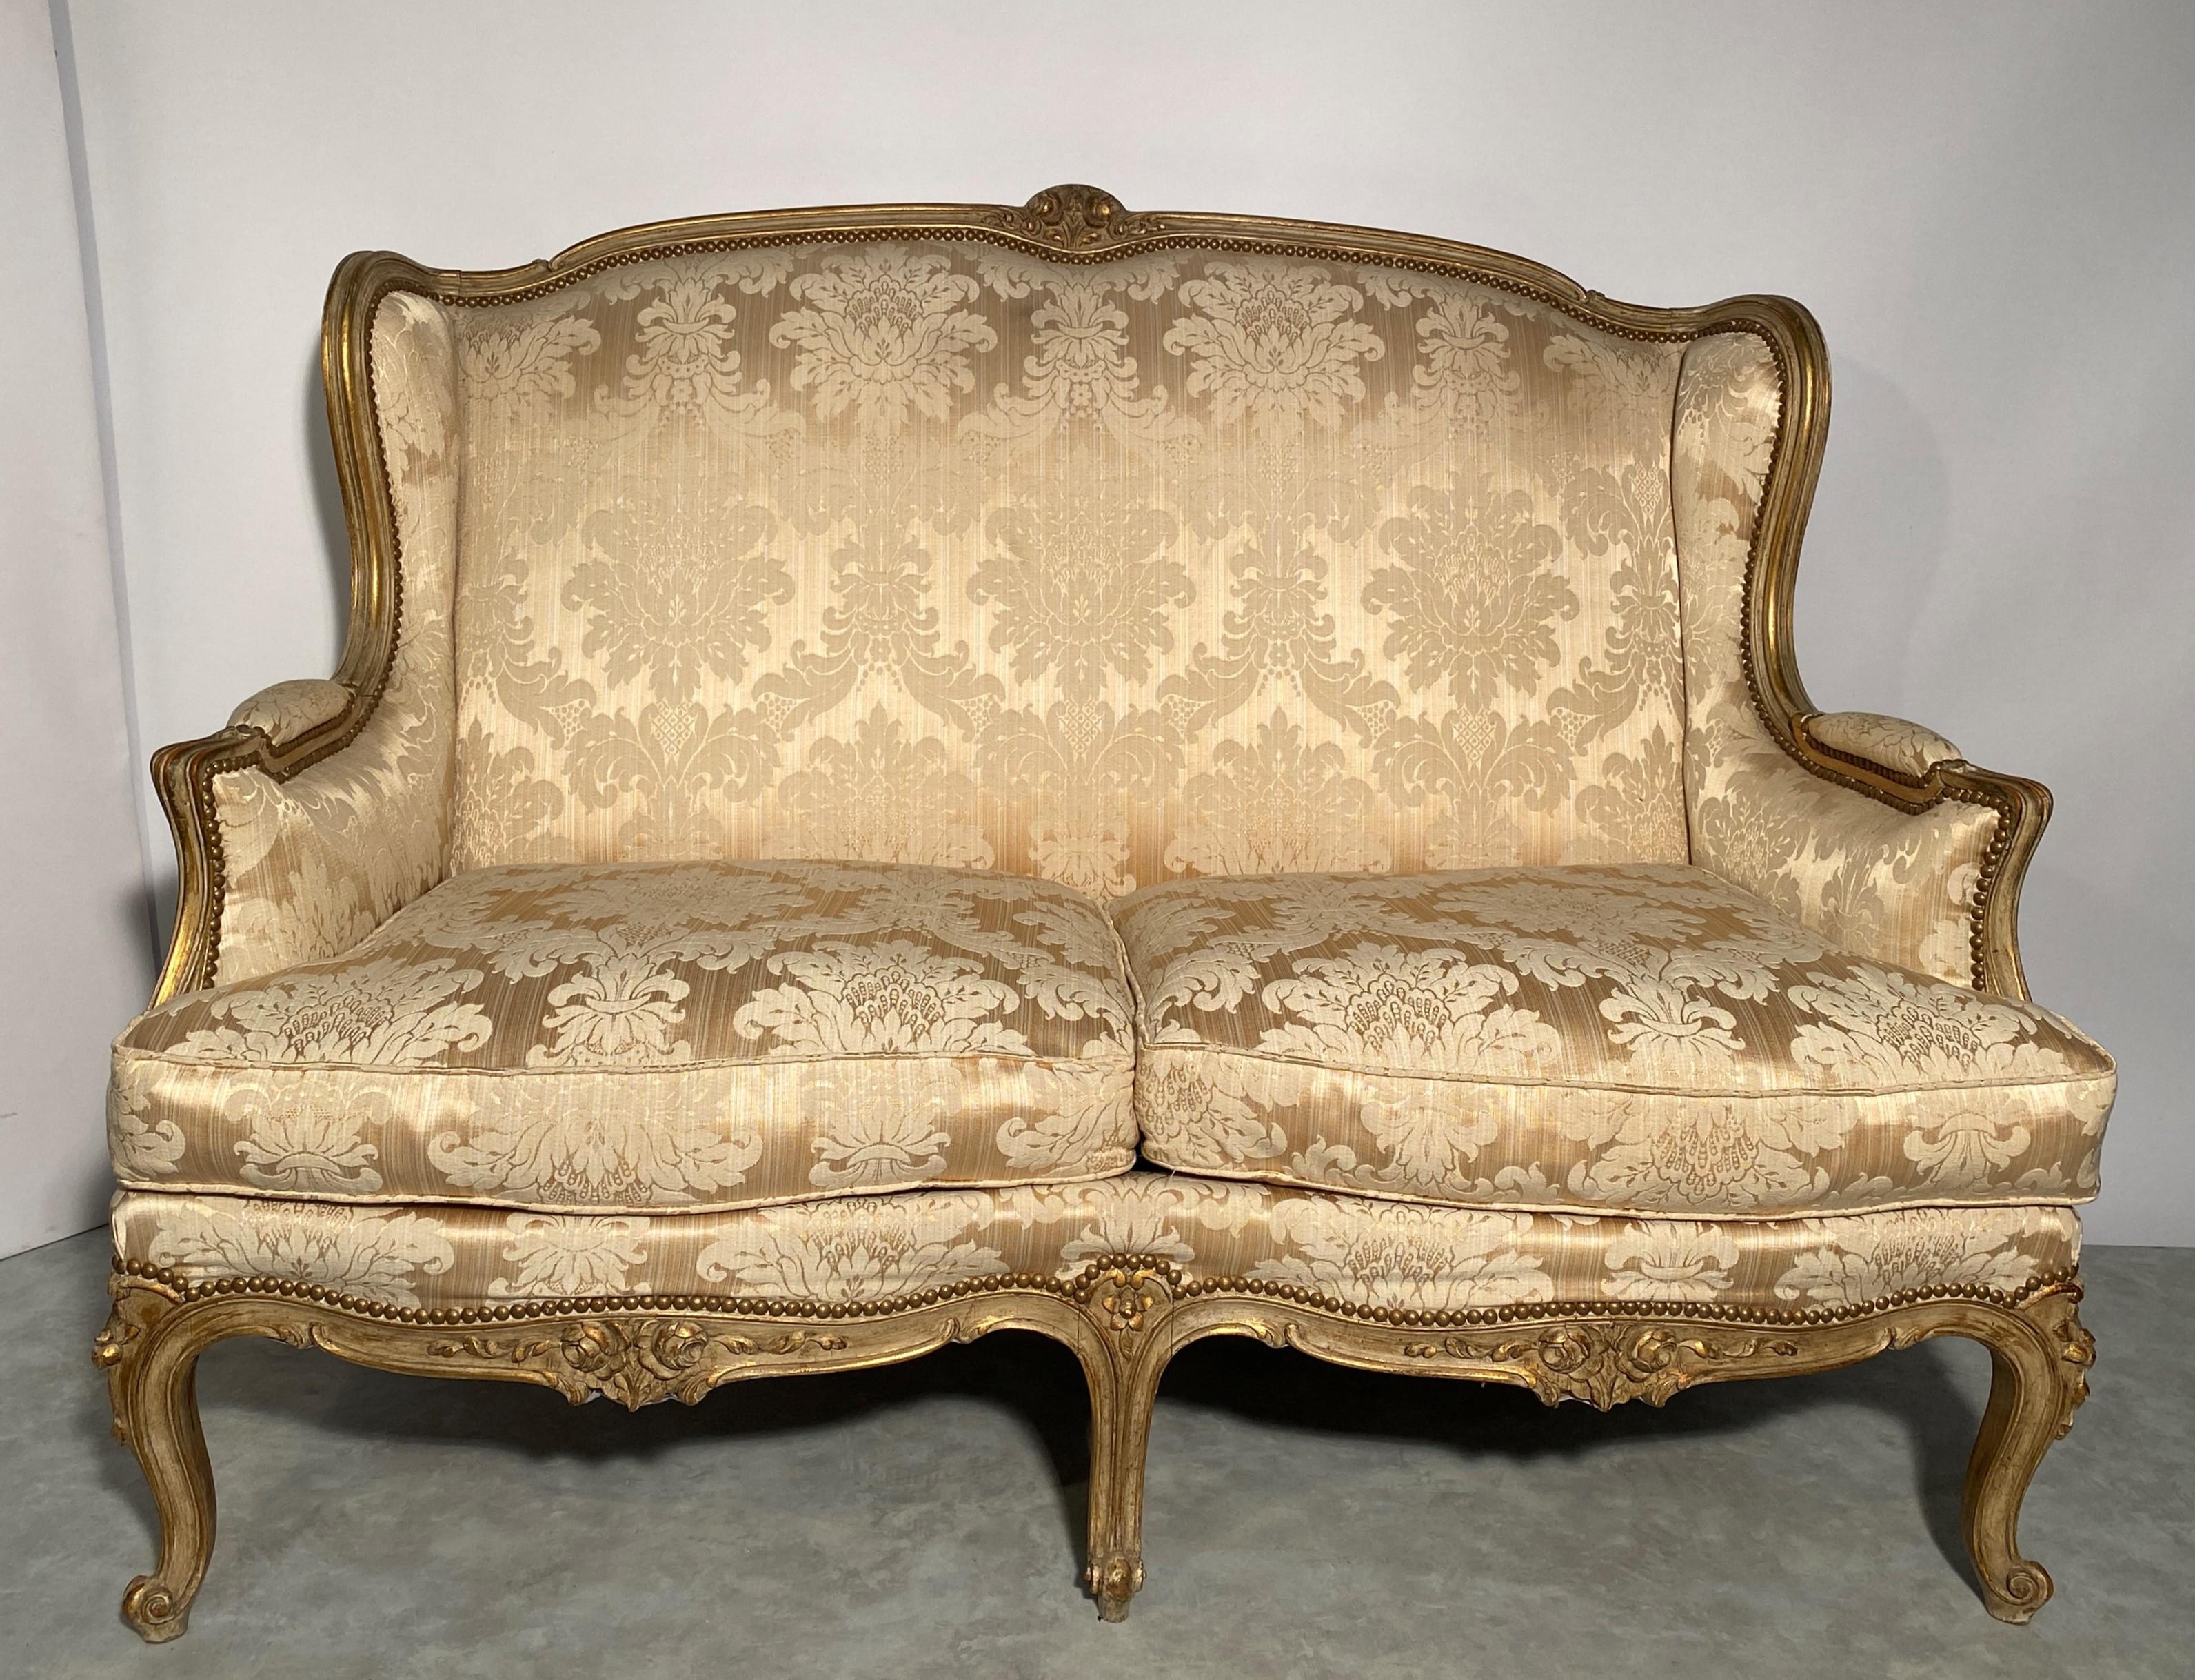 20th Century Sofa In Molded Wood And Carved With Flowers France Louis XV Style For Sale